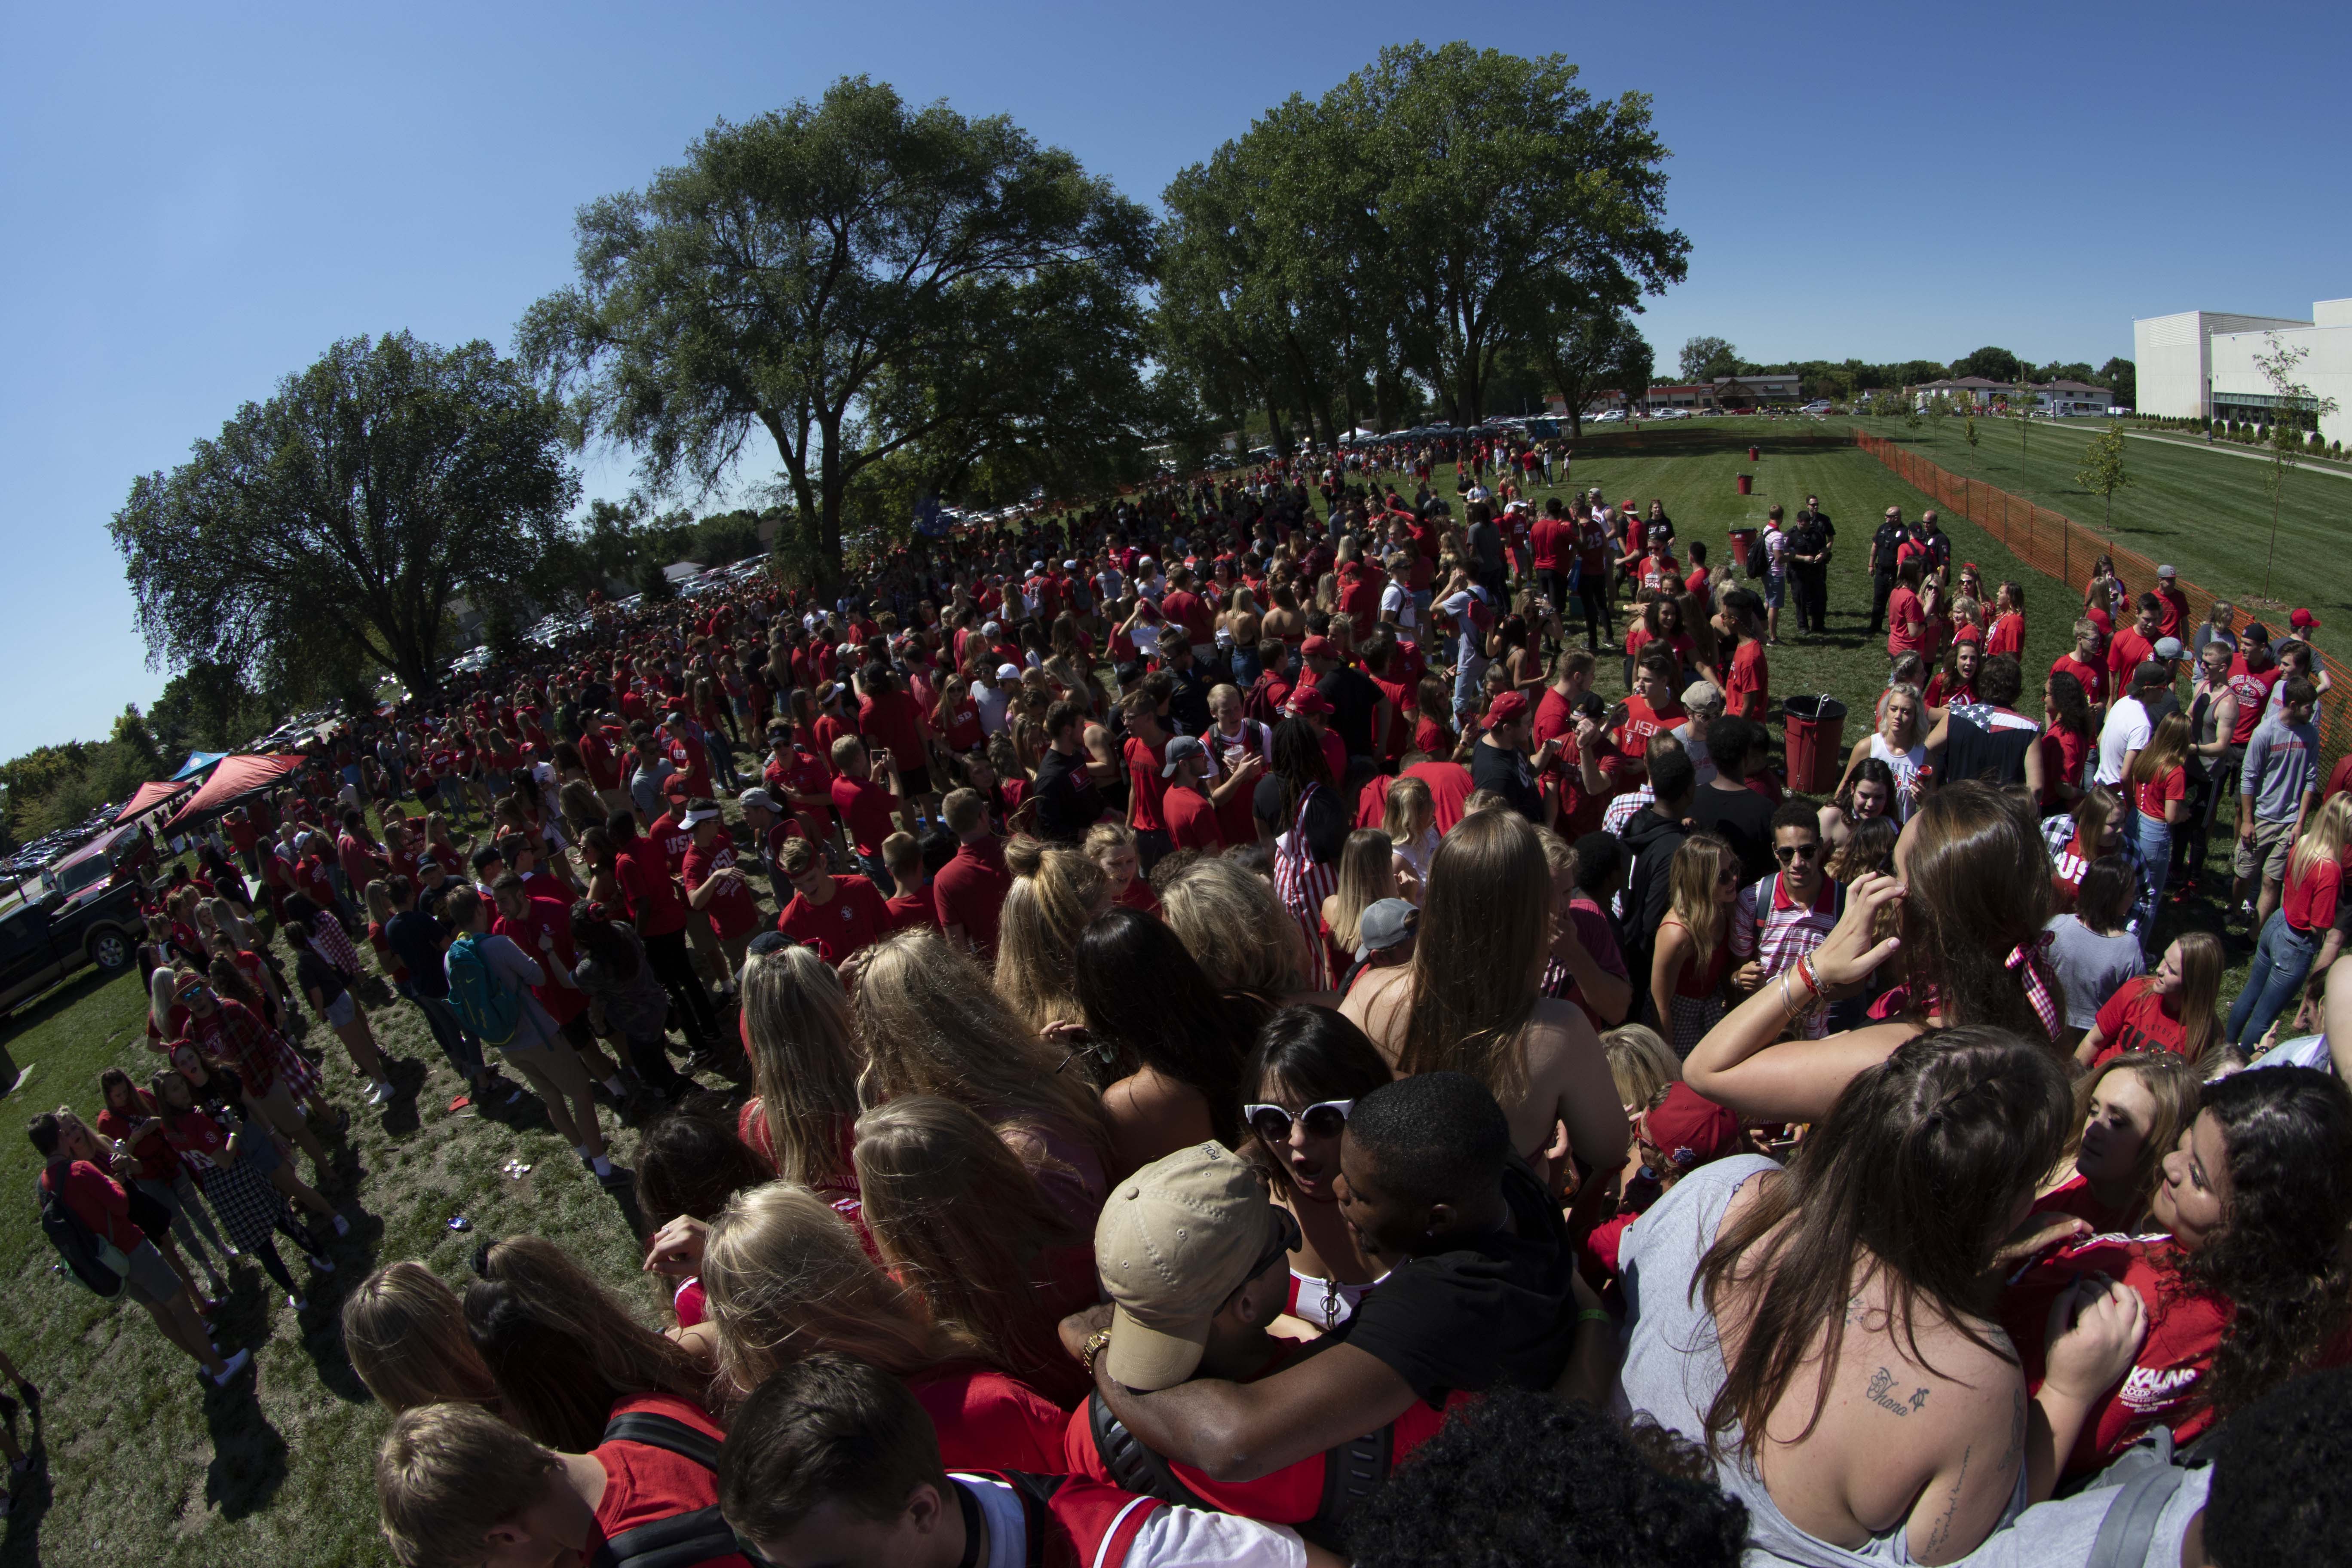 Students react to season’s first tailgate in new area